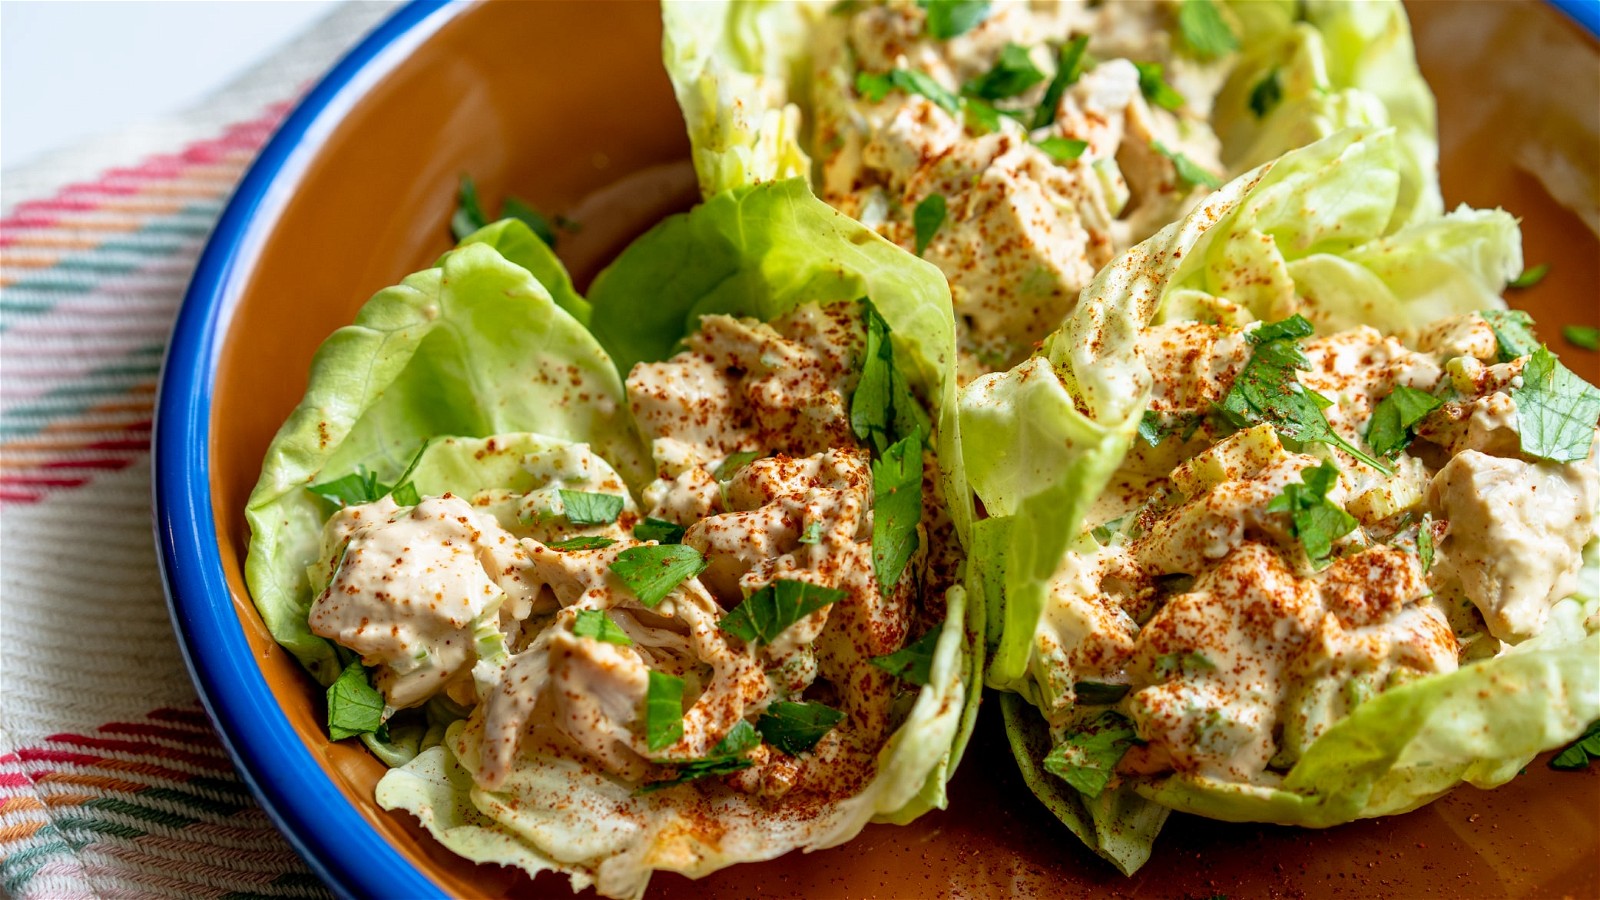 Image of Chipotle Lime Chicken Salad